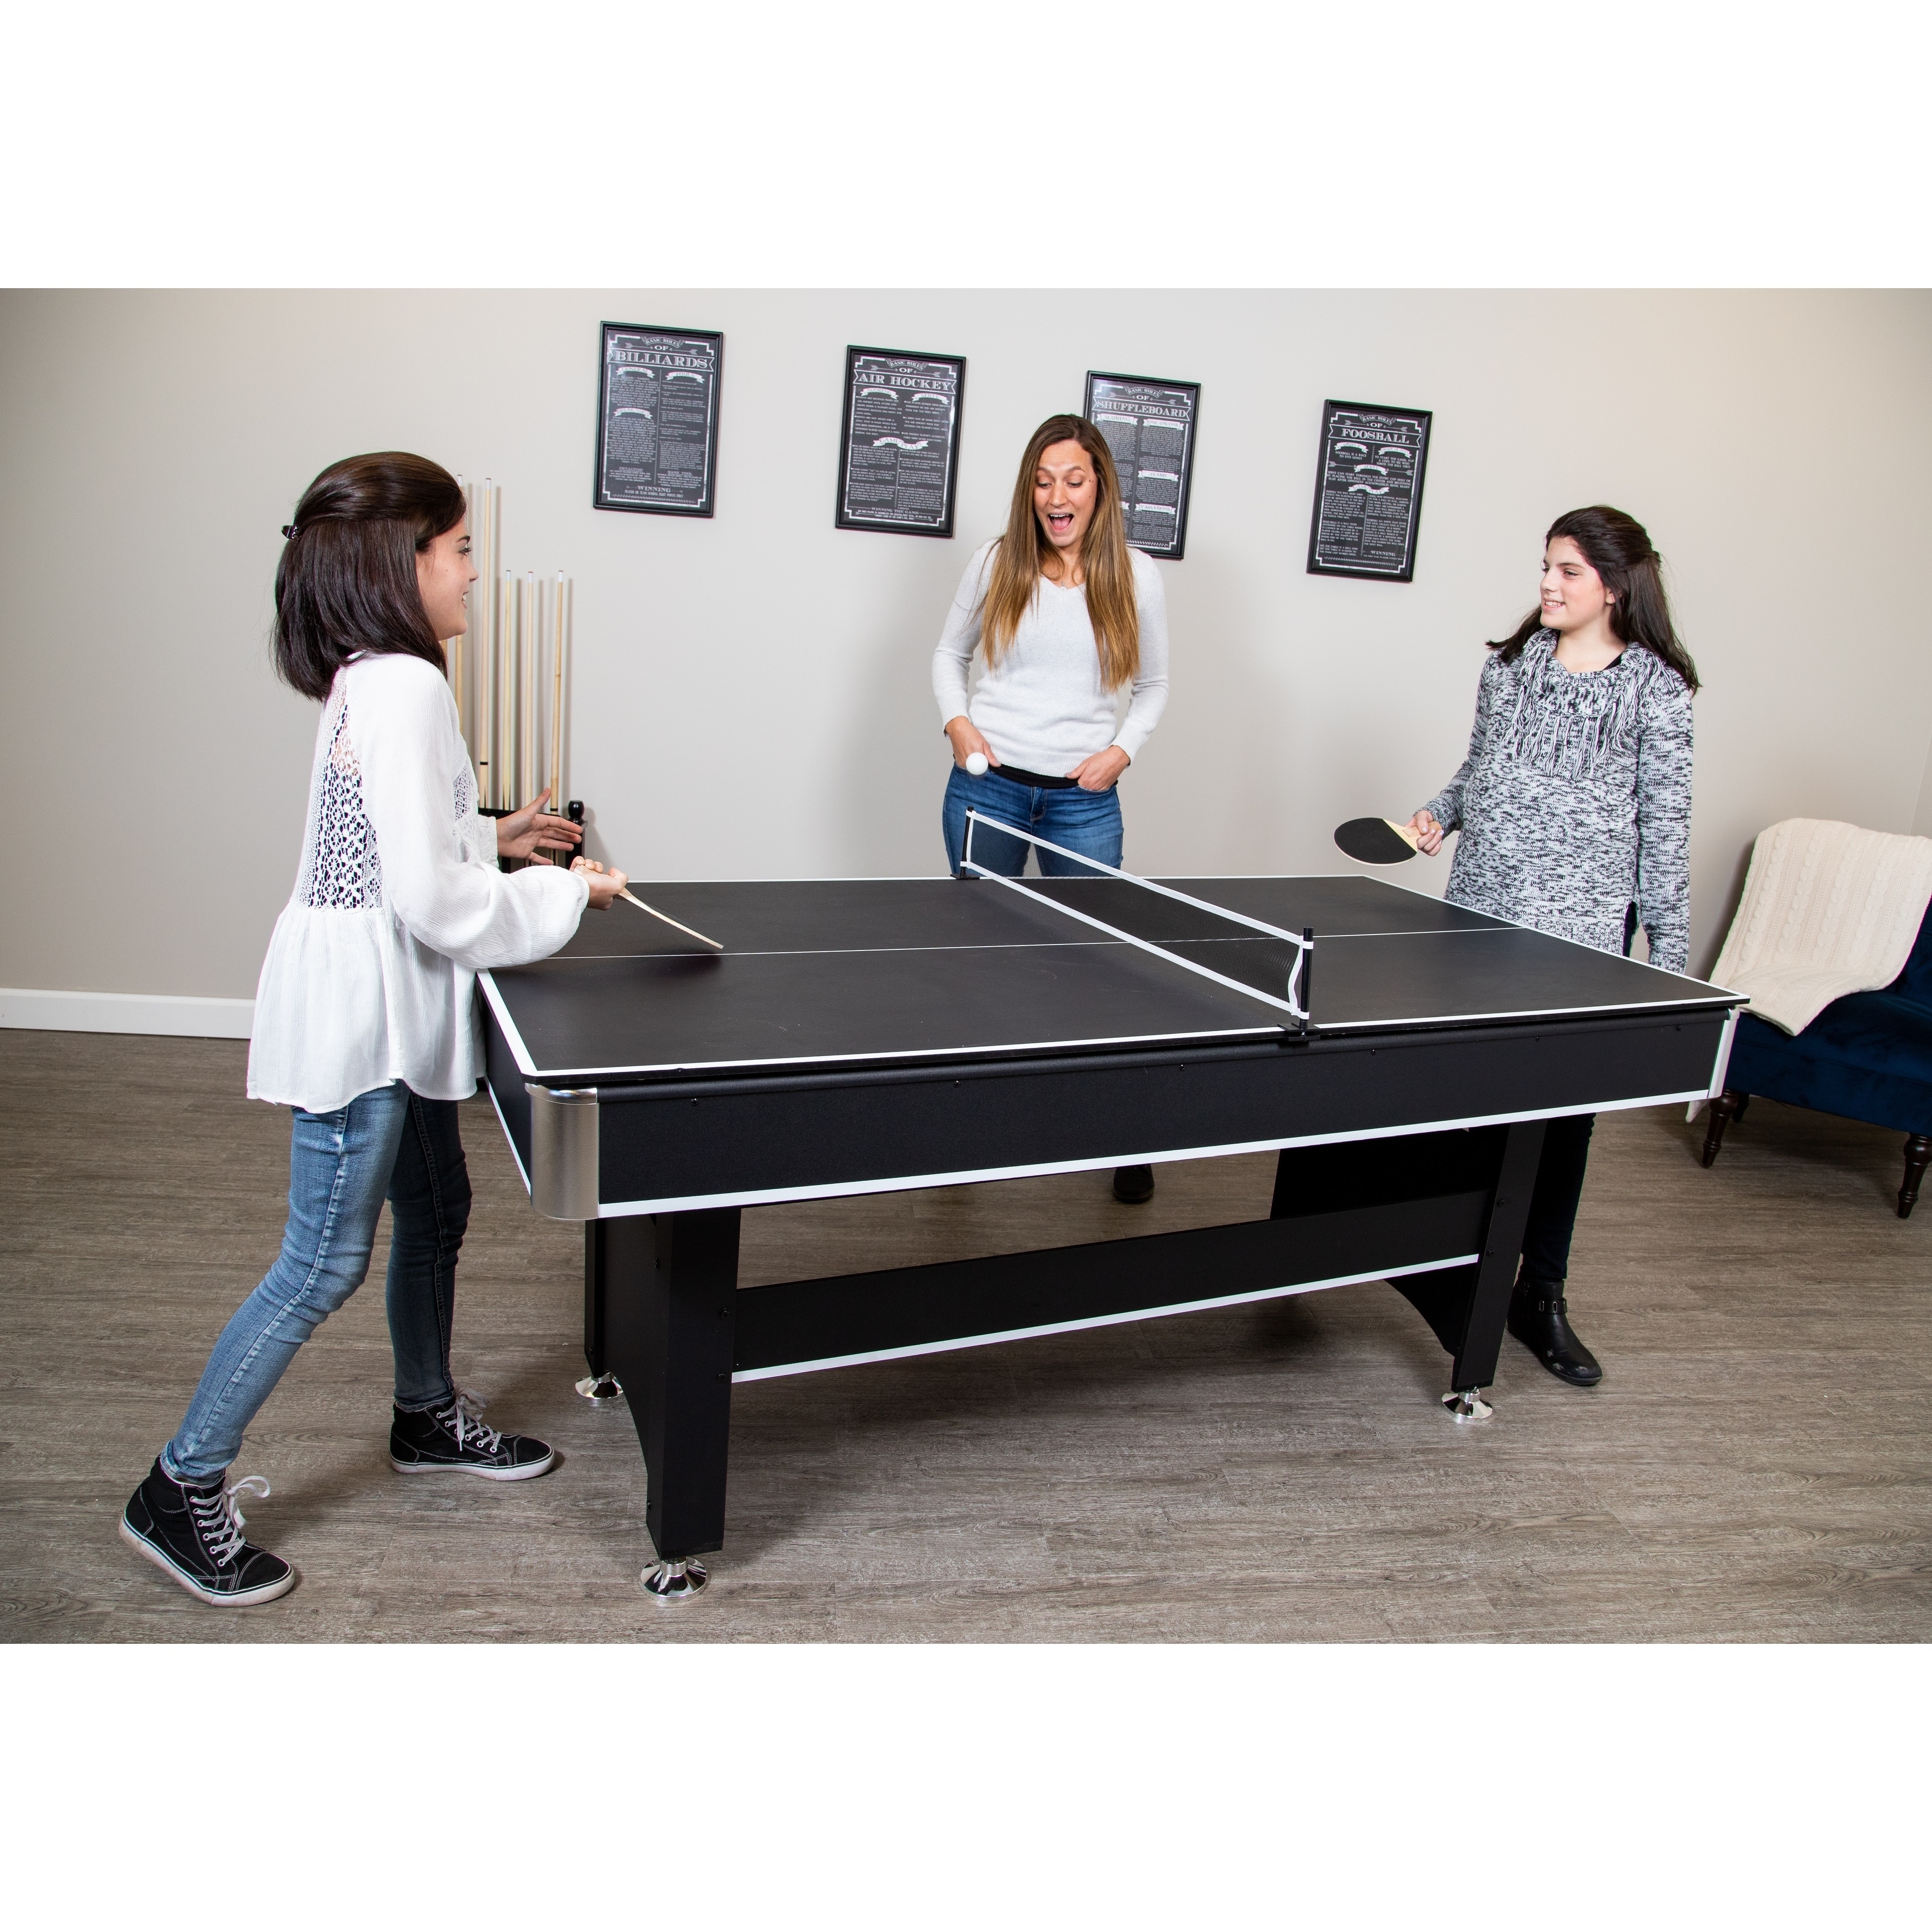 Spartan 6 Ft Pool Table With Table Tennis Conversion Top Black Finish Overstock 25738905